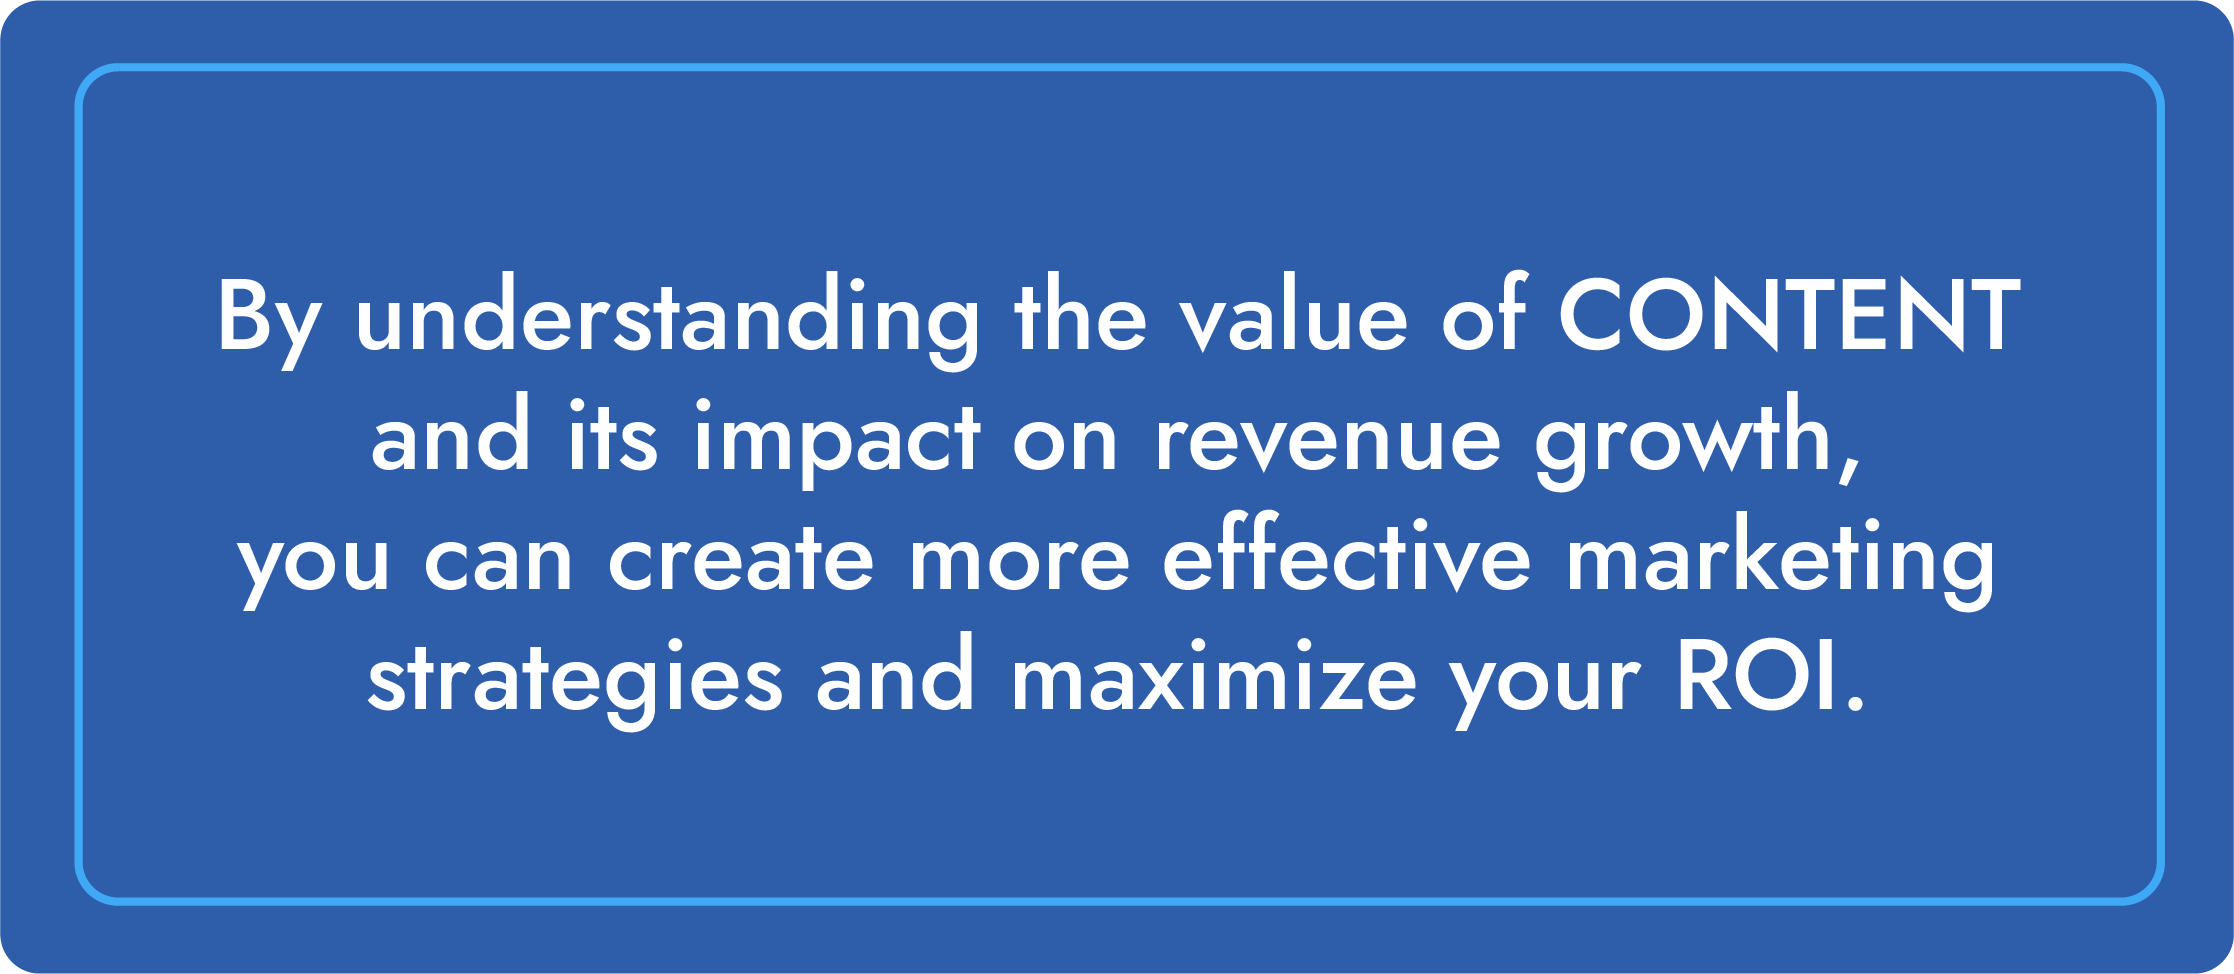 By understanding the value of CONTENT and its impact on revenue growth, you can create more effective marketing strategies and maximize your ROI.